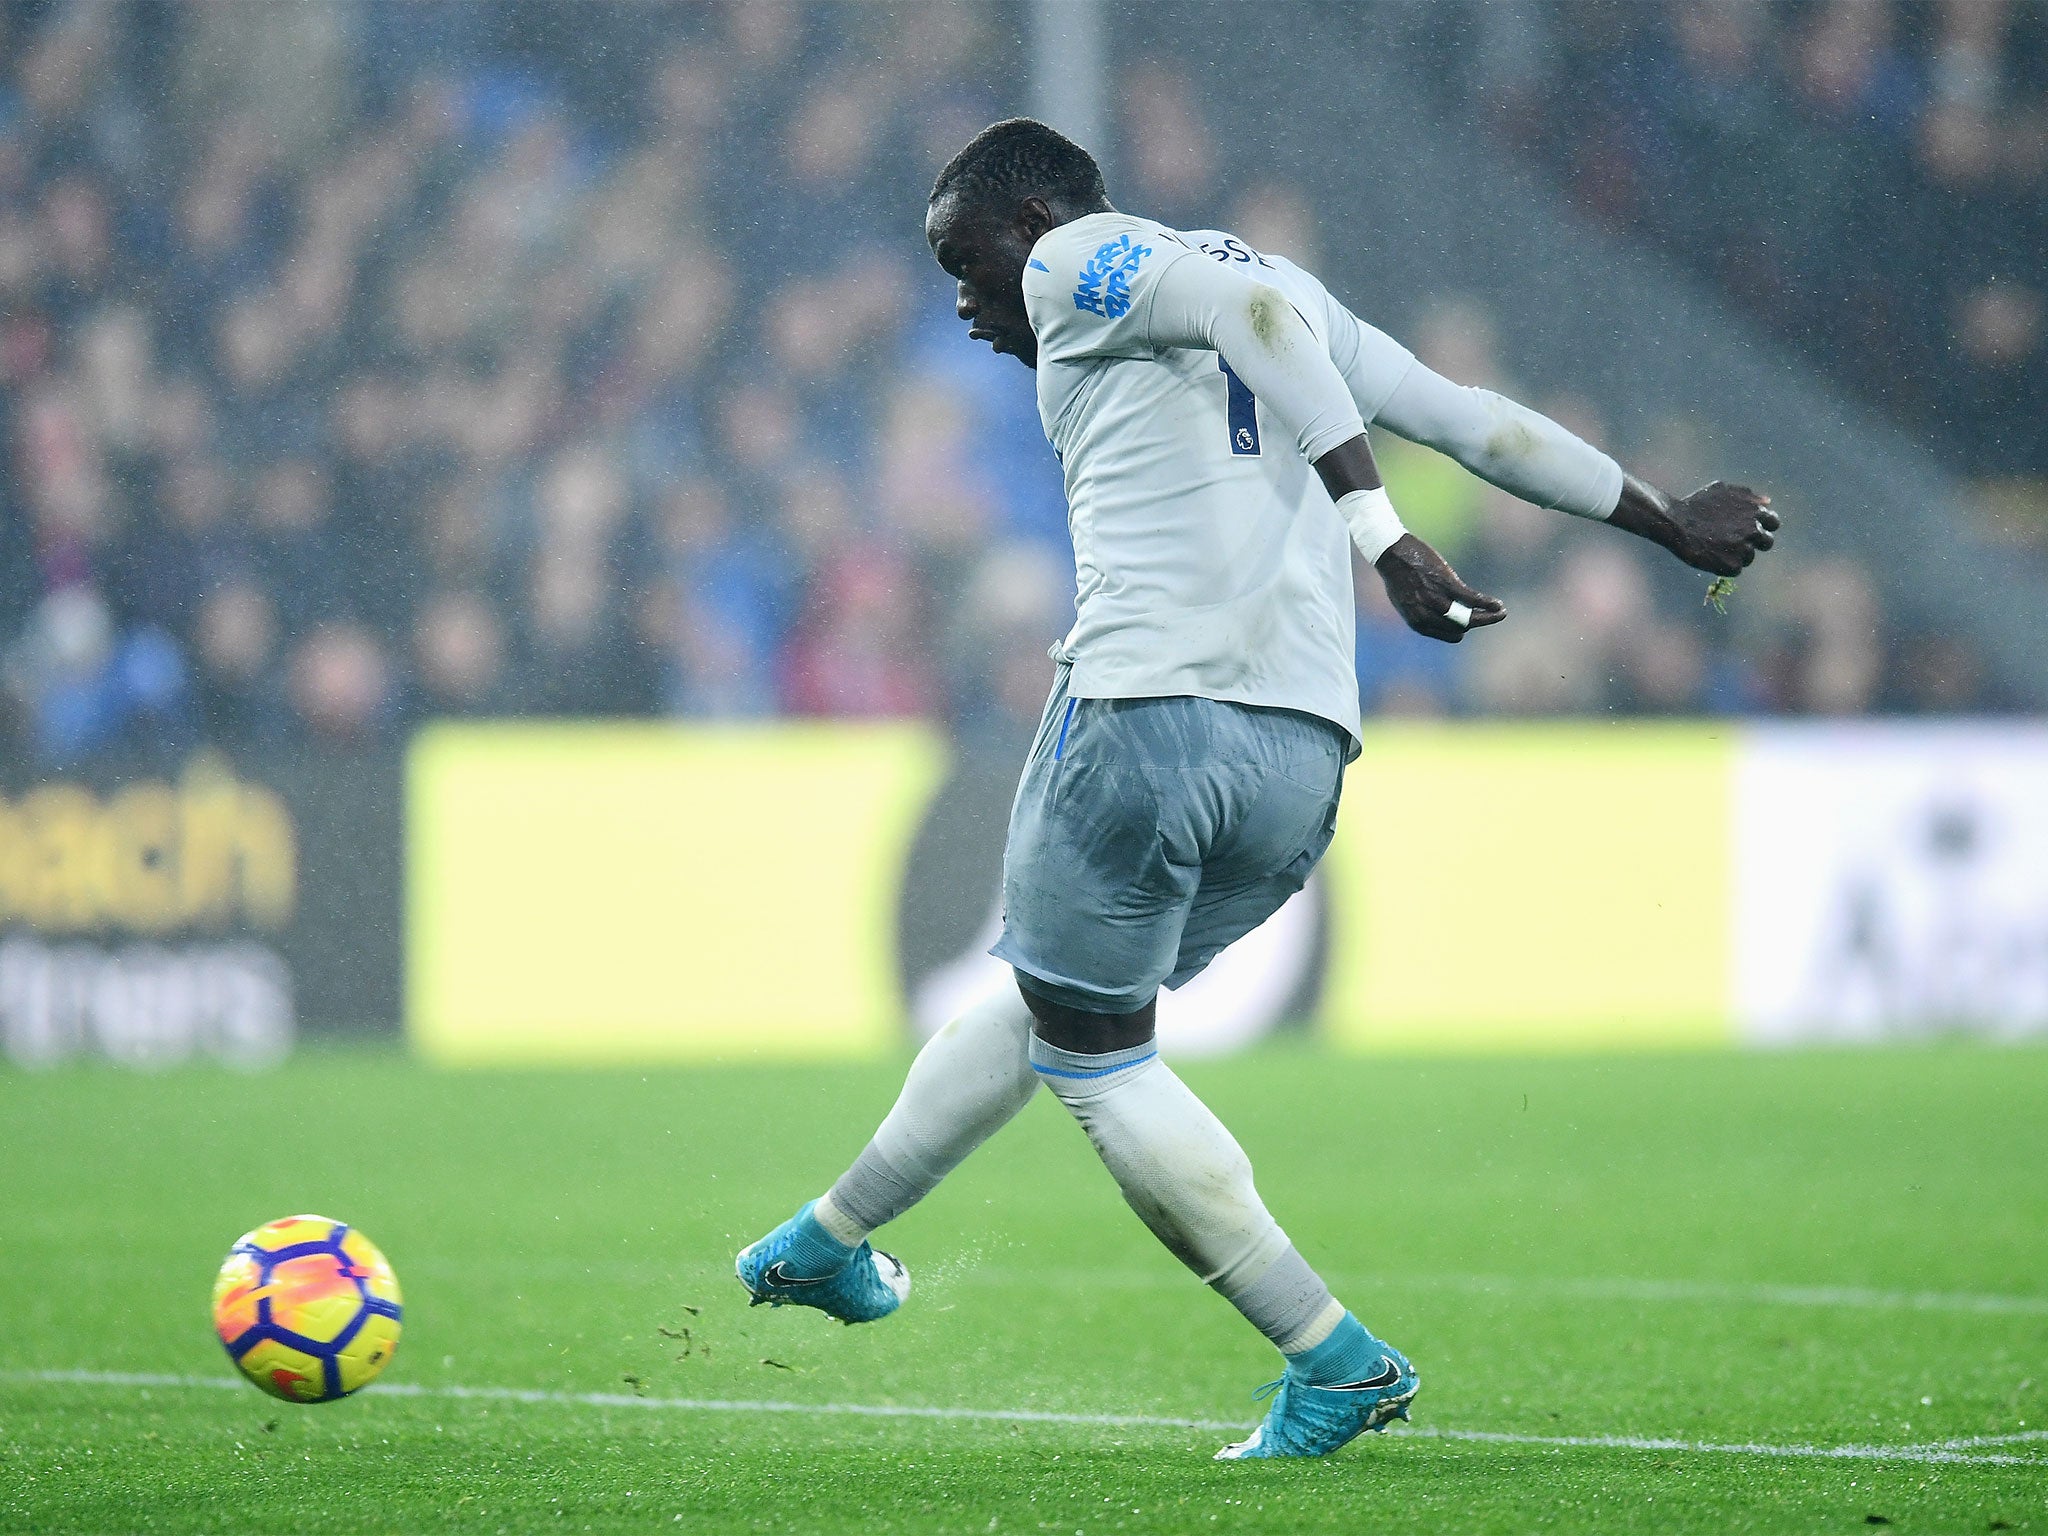 Oumar Niasse was handed Everton's equaliser on a plate by Palace